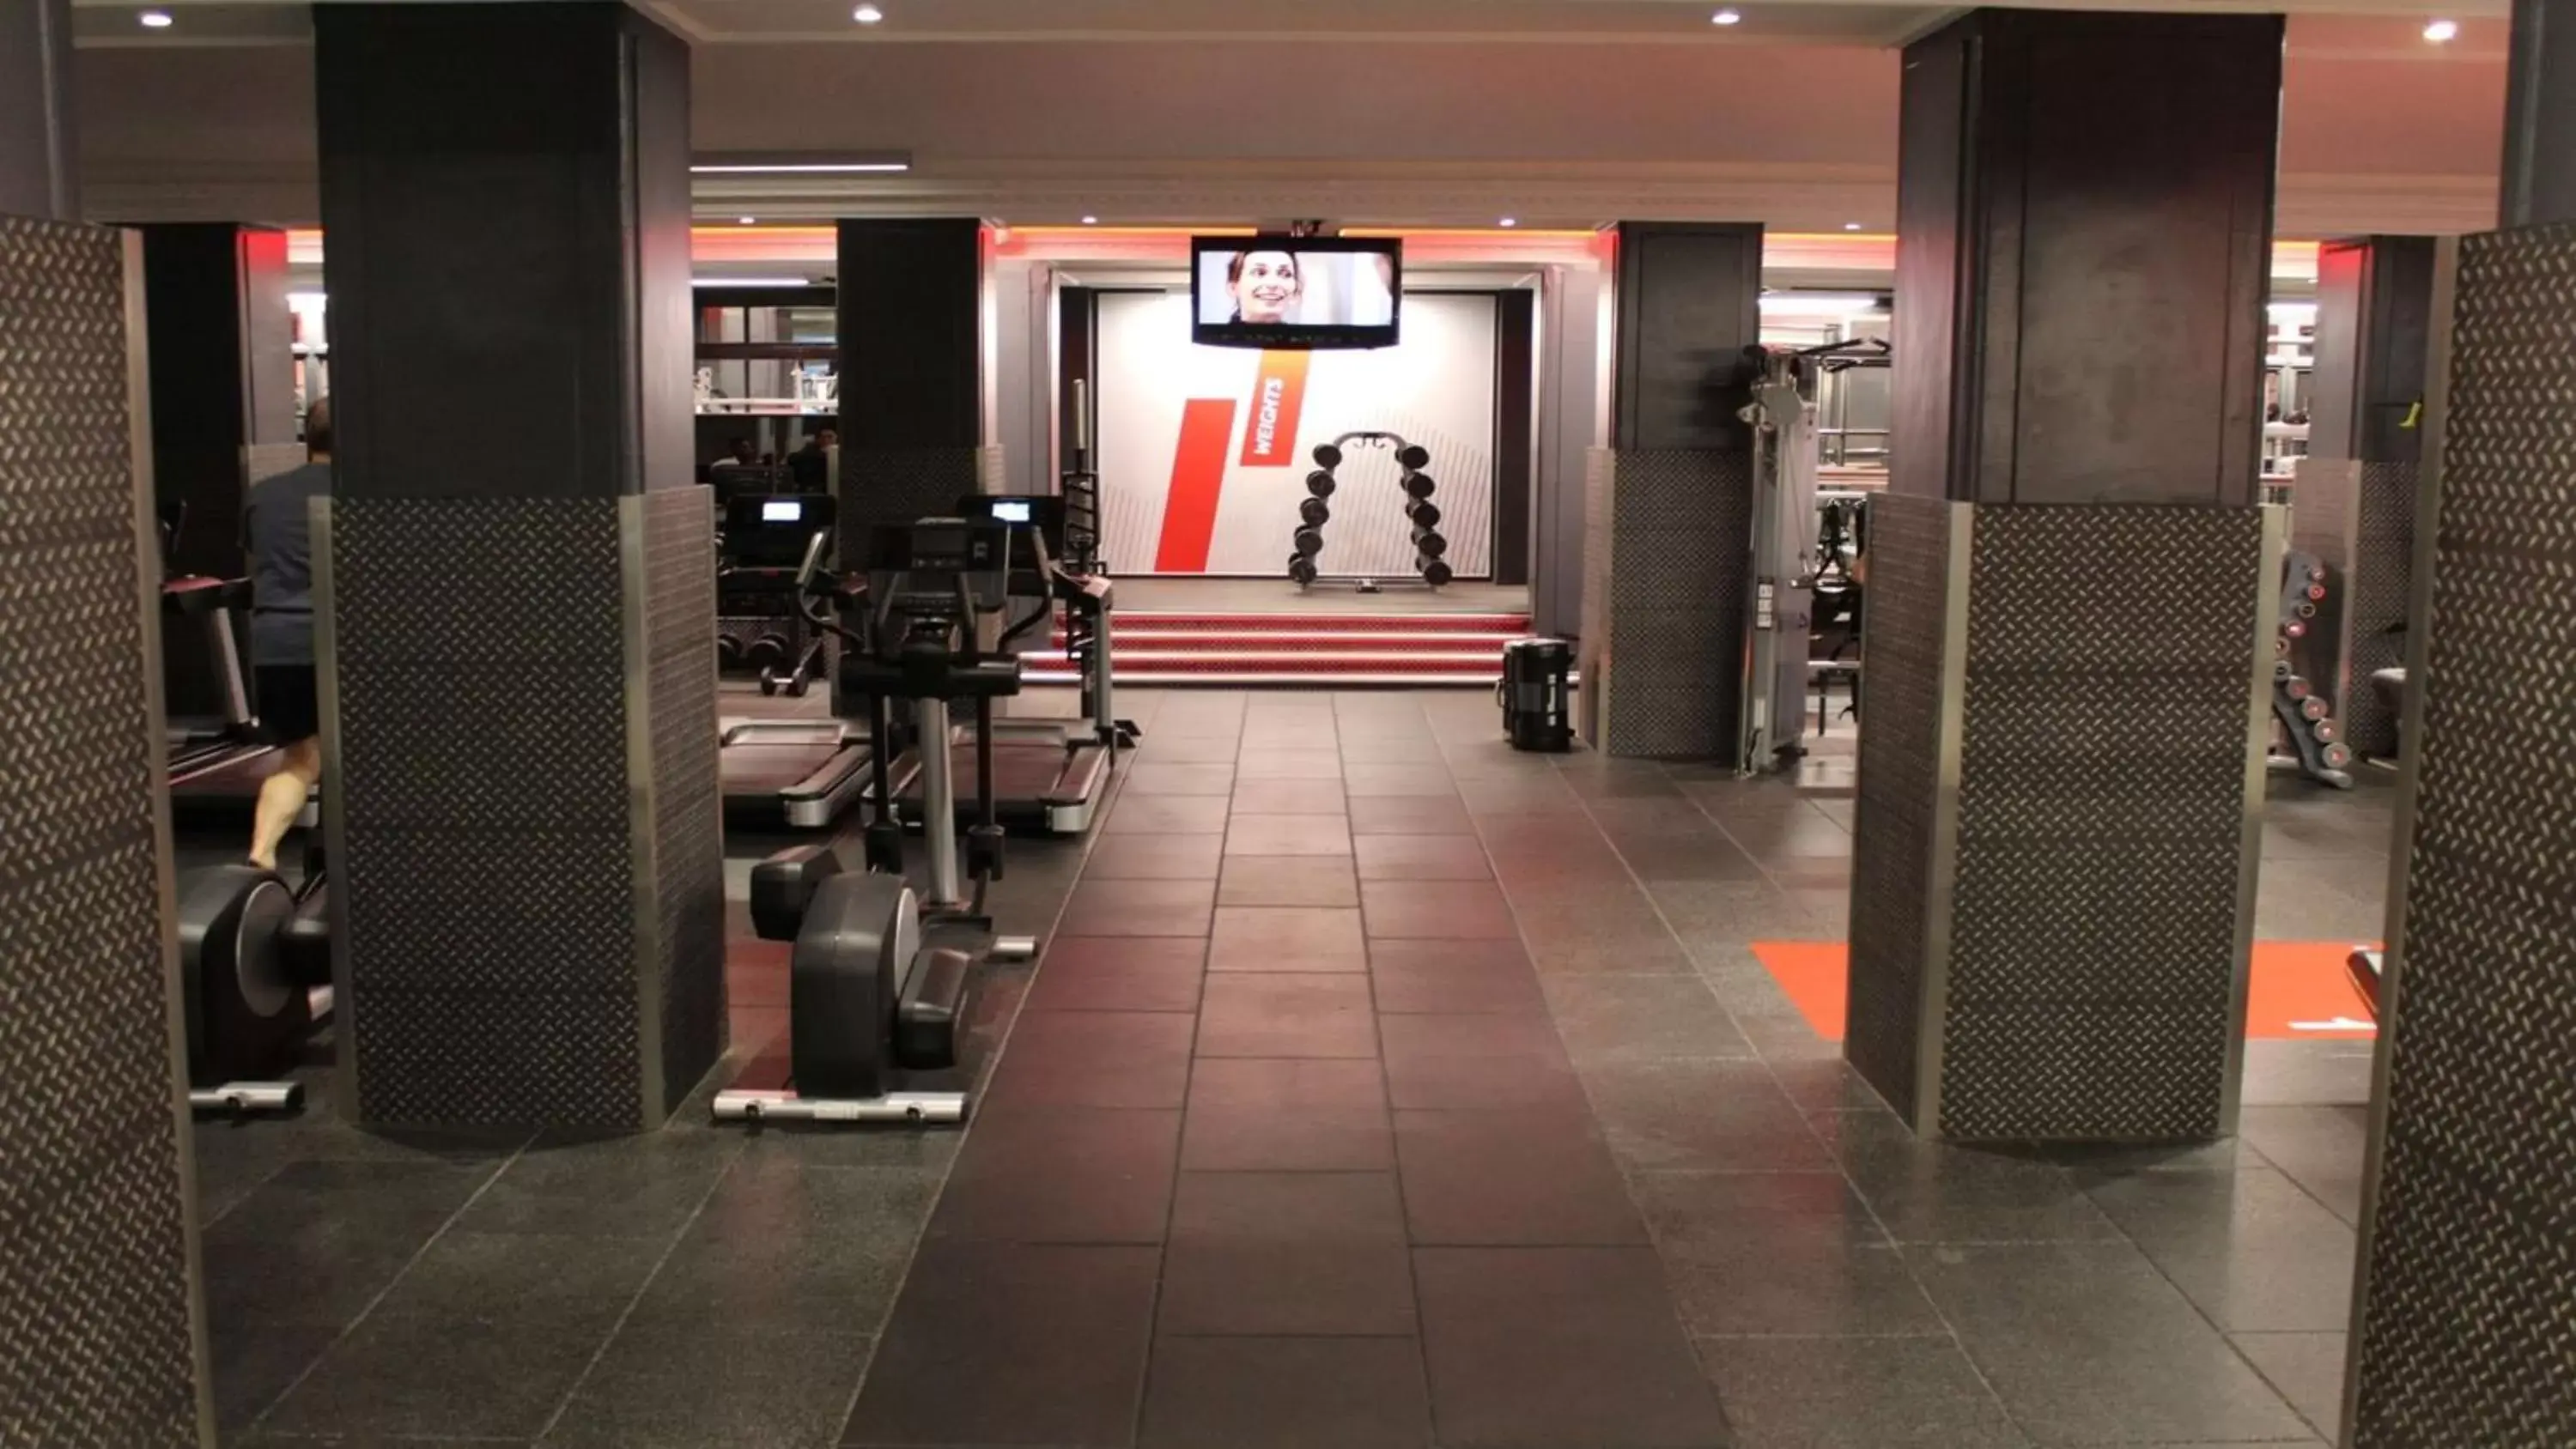 Fitness centre/facilities in The Waldorf Hilton